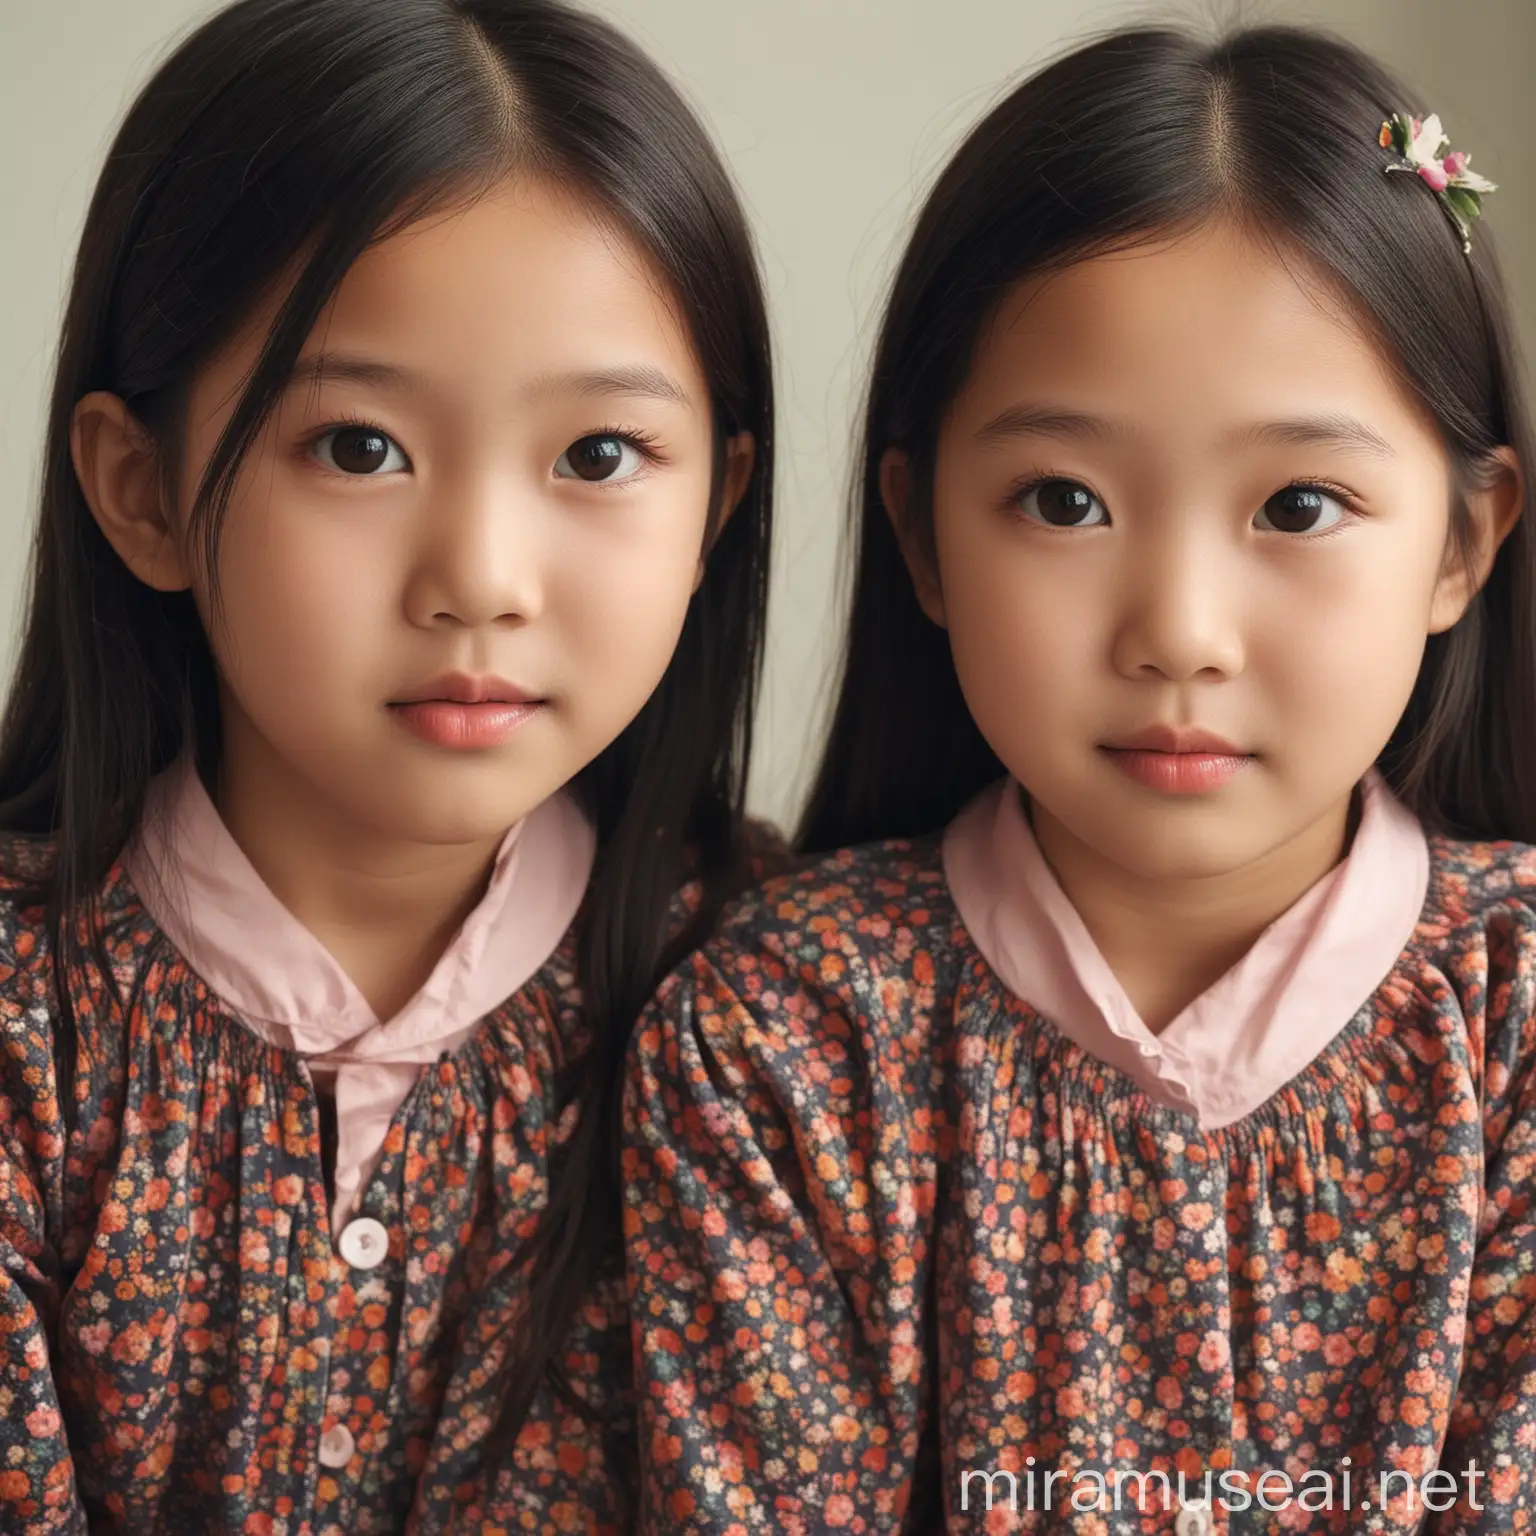 twin girls. girls are Asian. 10 year old